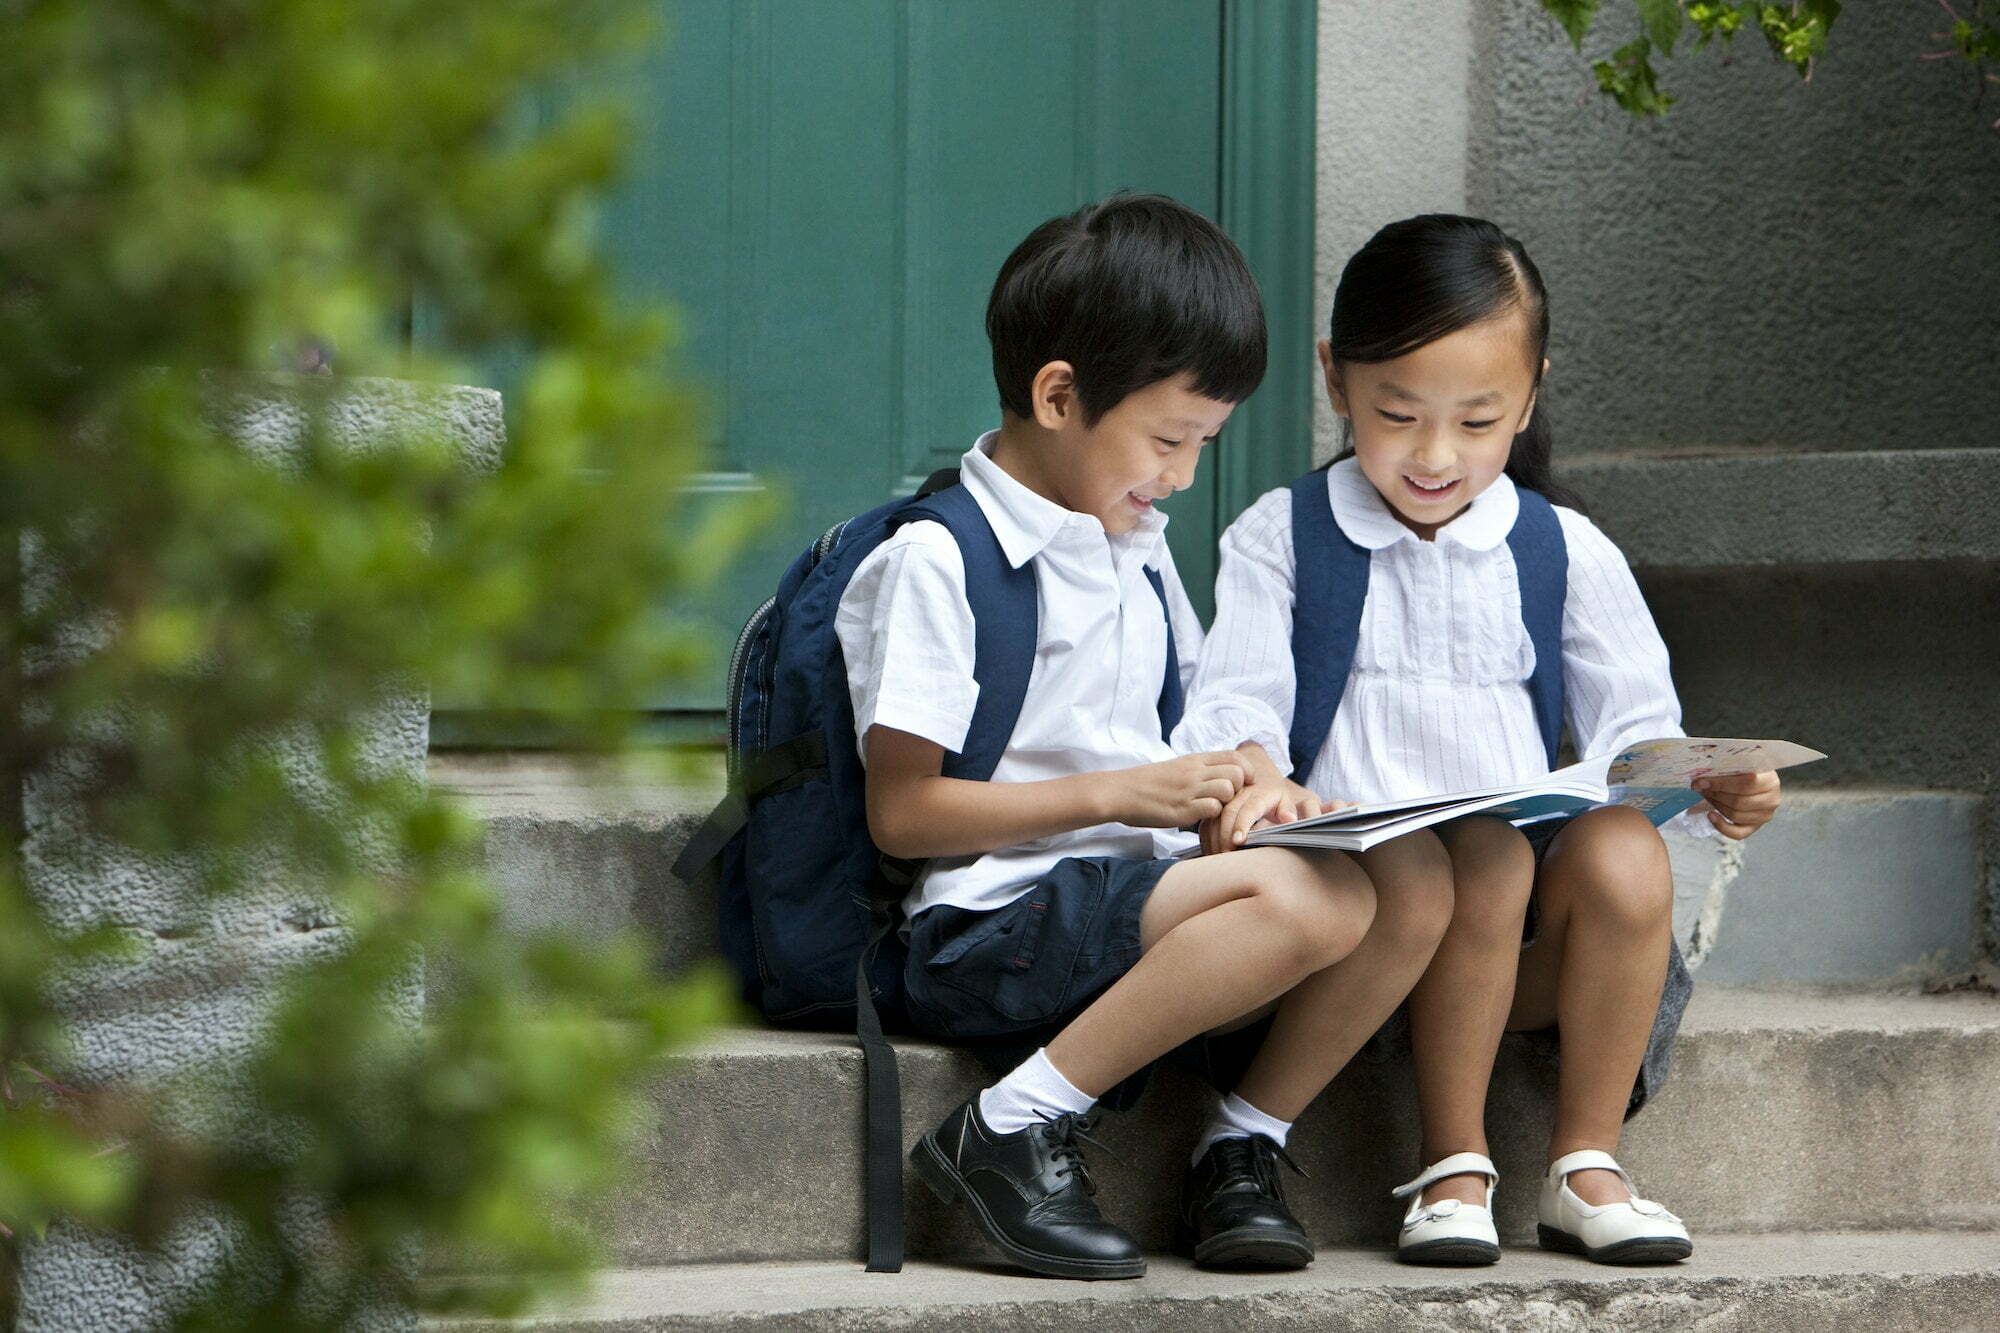 Two school children studying outside